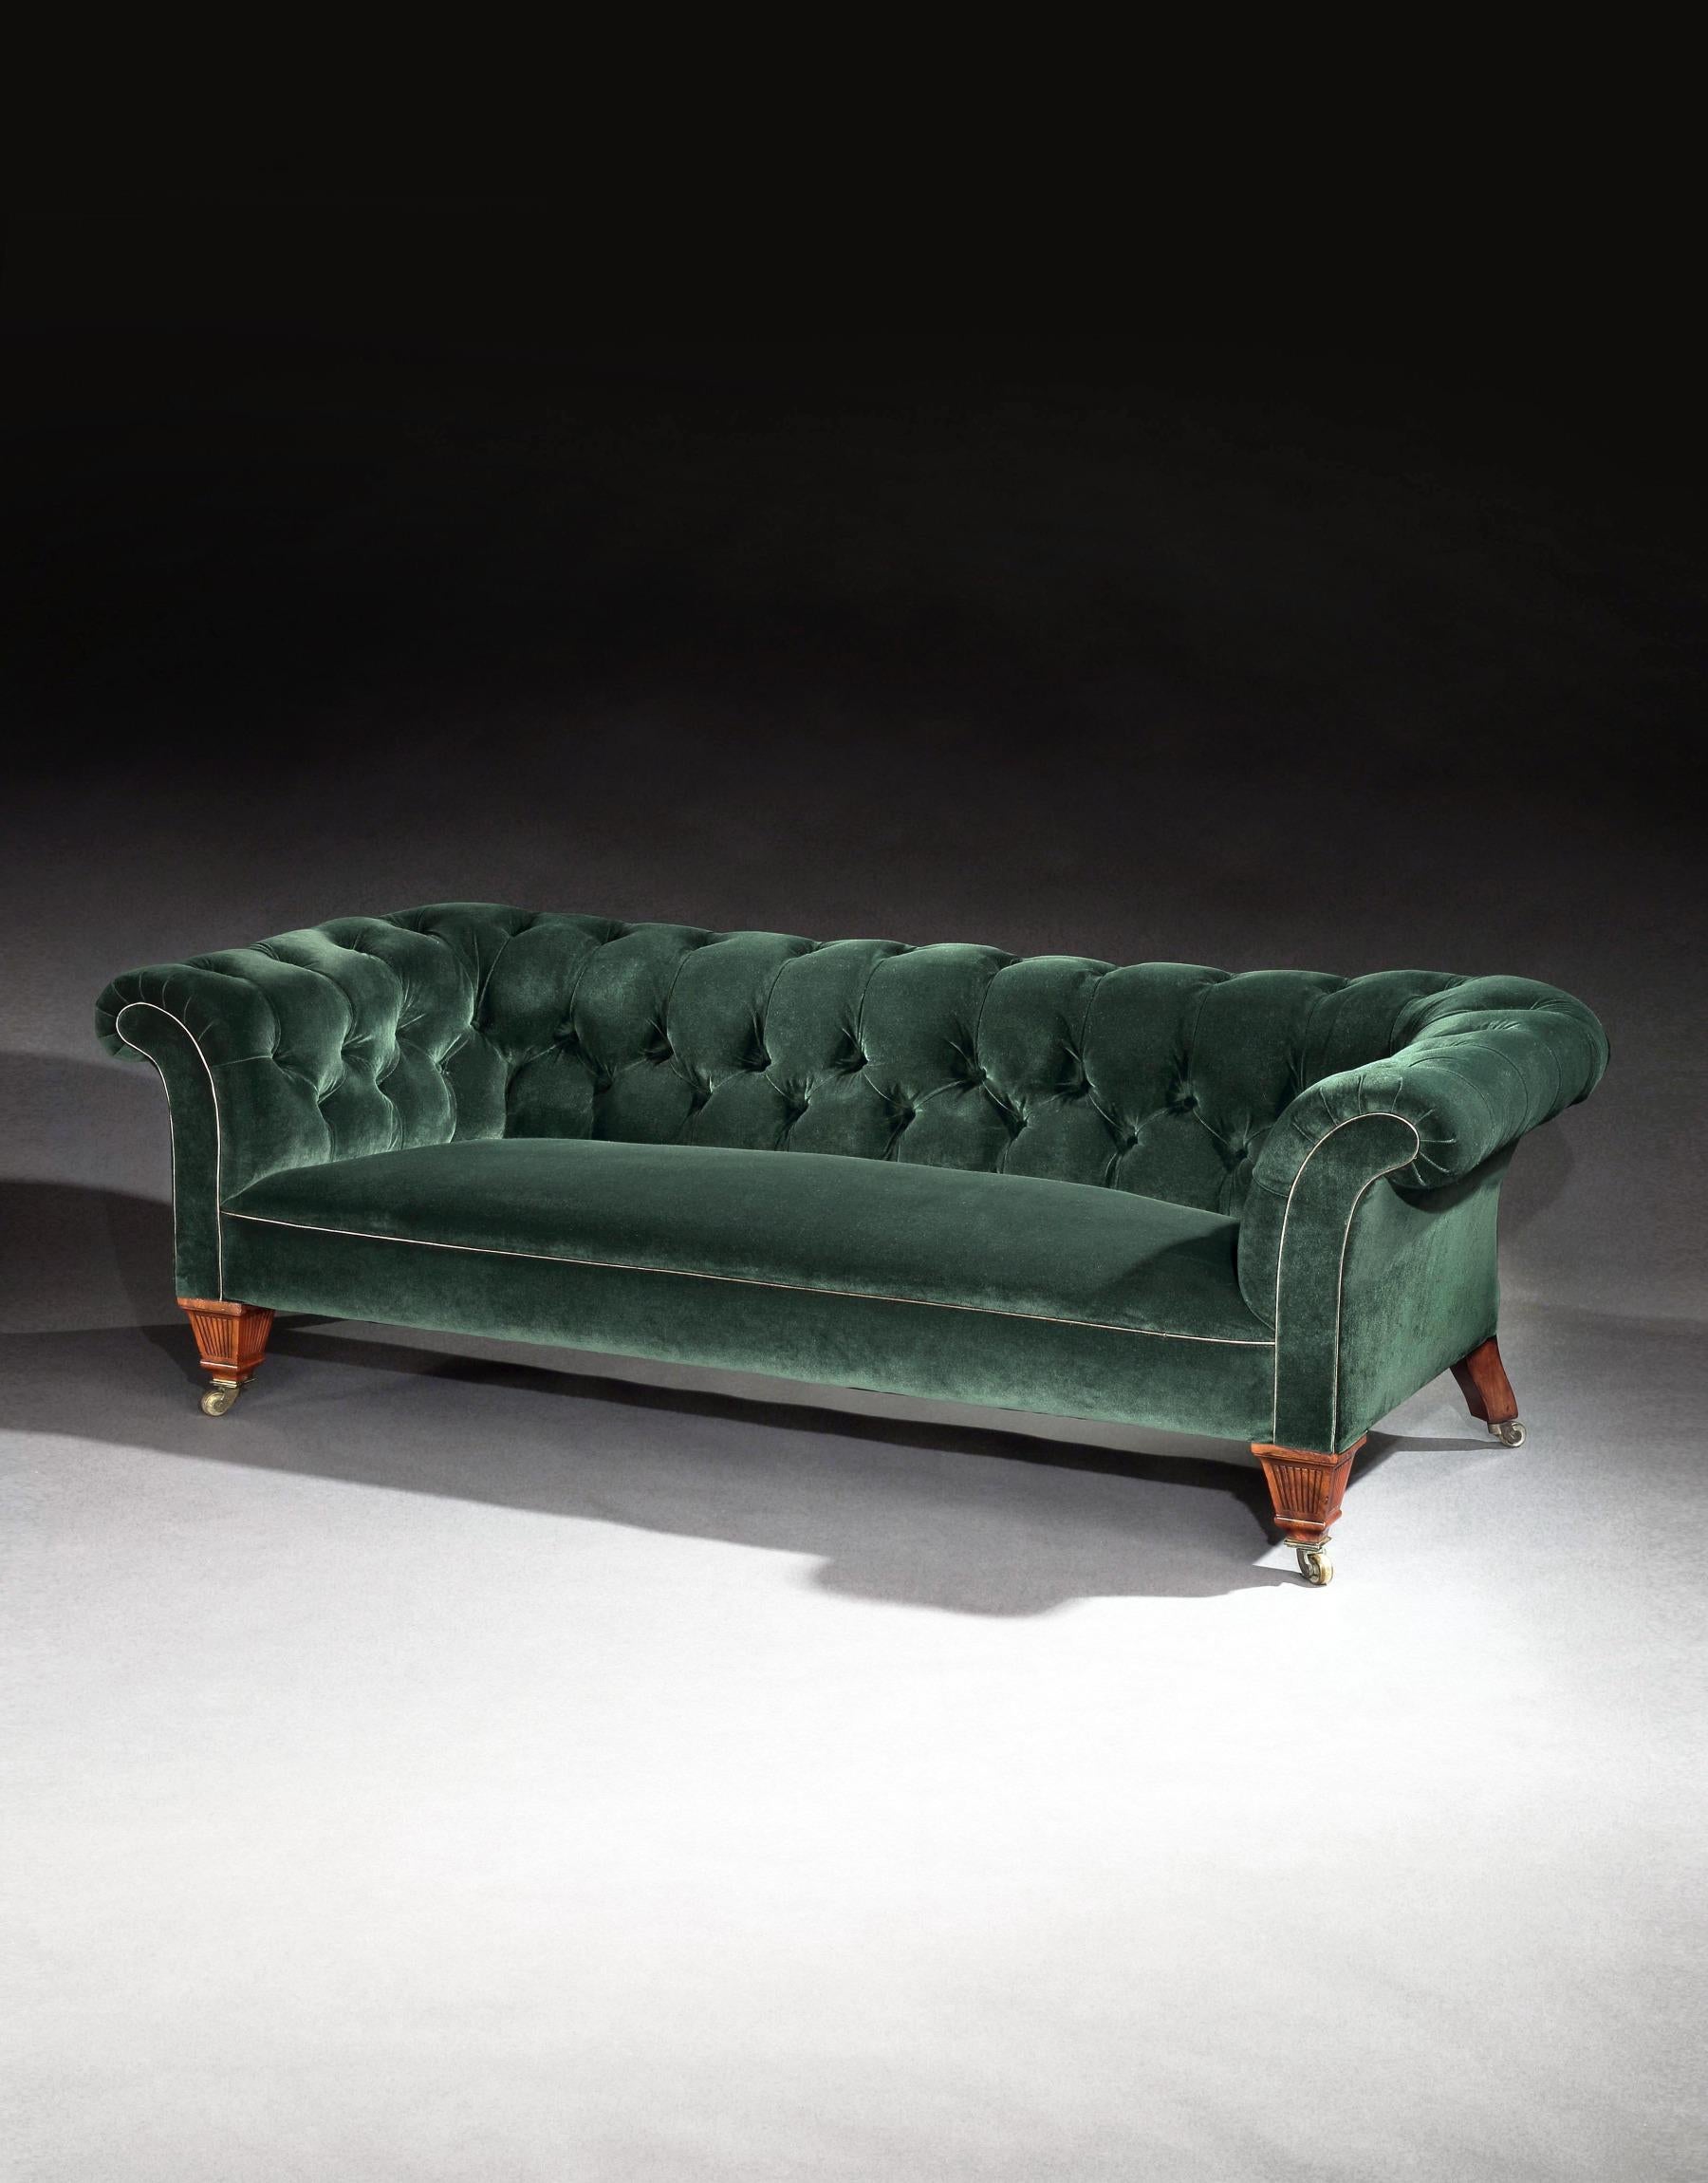 19th Century C Hindley and Sons, London Victorian Chesterfield Sofa Upholstered 1